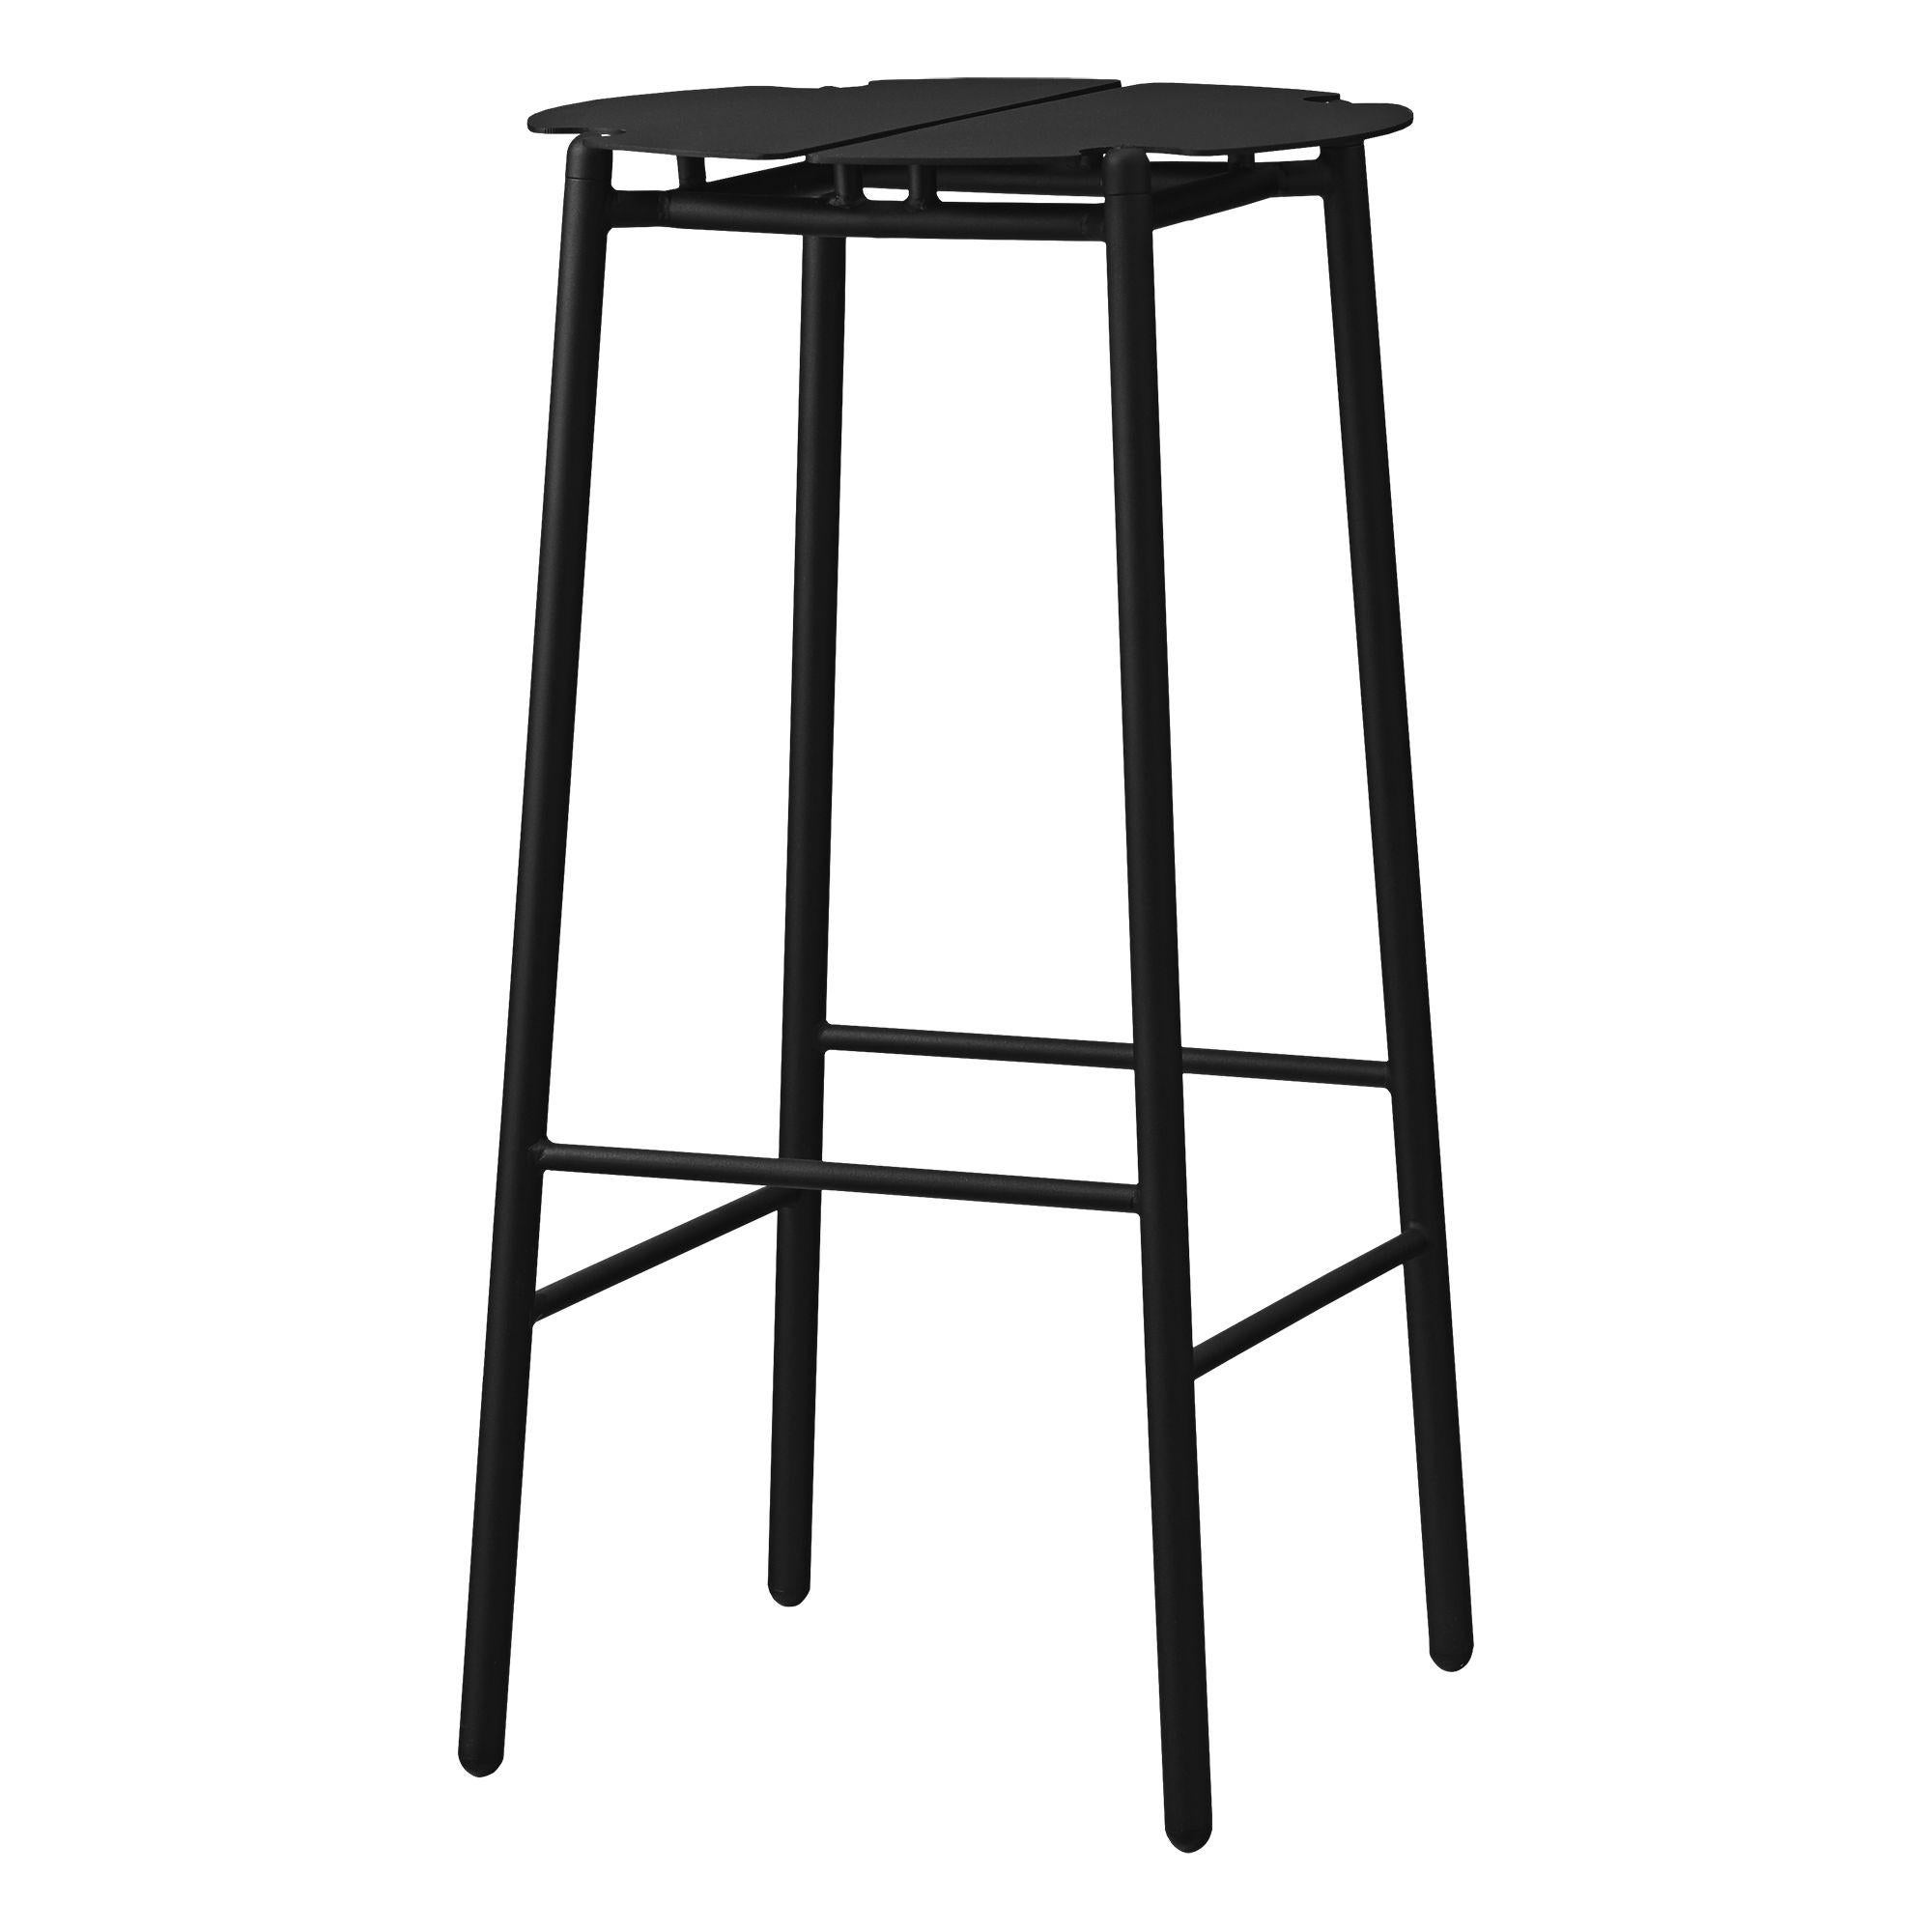 Black Minimalist bar stool 
Dimensions: Diameter 38 x H 75 cm 
Materials: Steel w. Matte Powder Coating & Aluminum w. Matte Powder Coating.
Available in colors: Taupe, Bordeaux, Forest, Ginger Bread, Black and, Black and Gold. 

Create a cozy